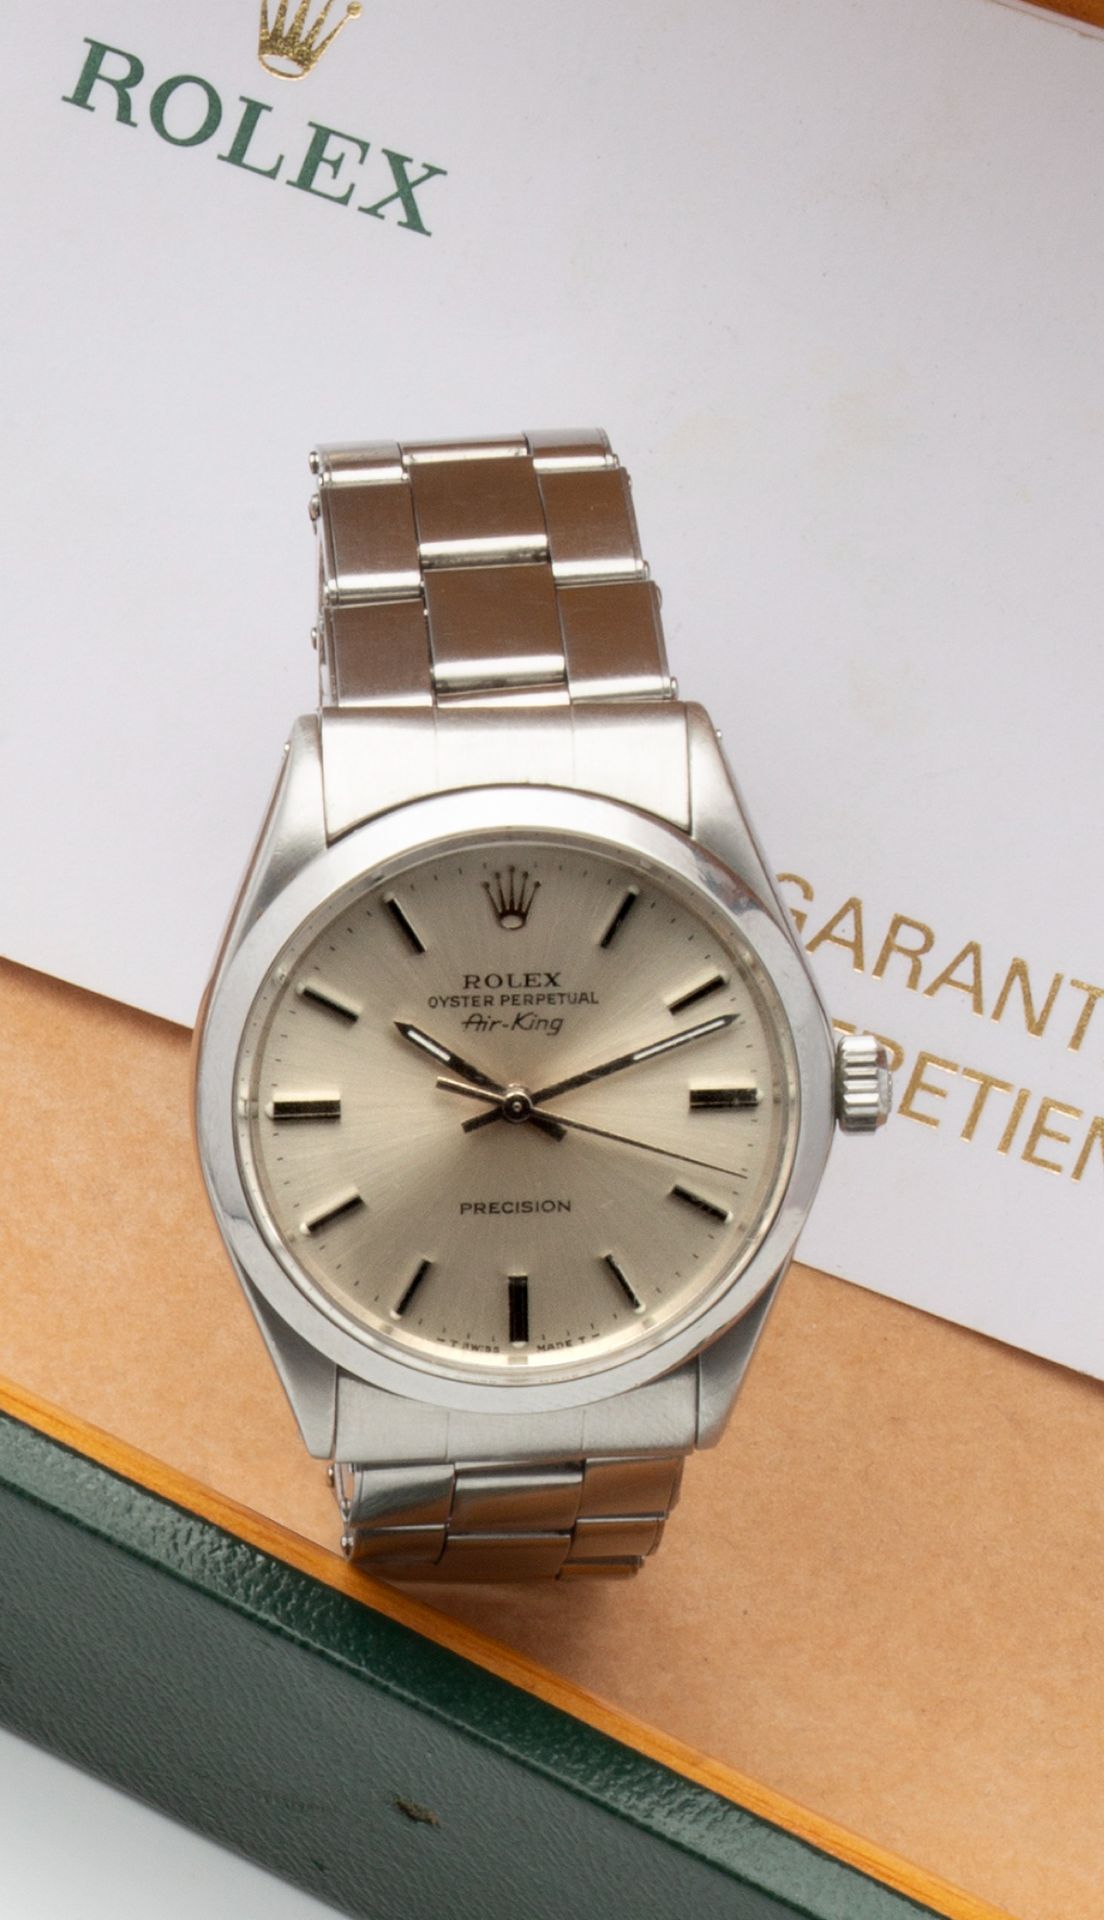 Null Rolex

Oyster Perpetual Air King Precision

Riferimento 5500

Orologio mist&hellip;